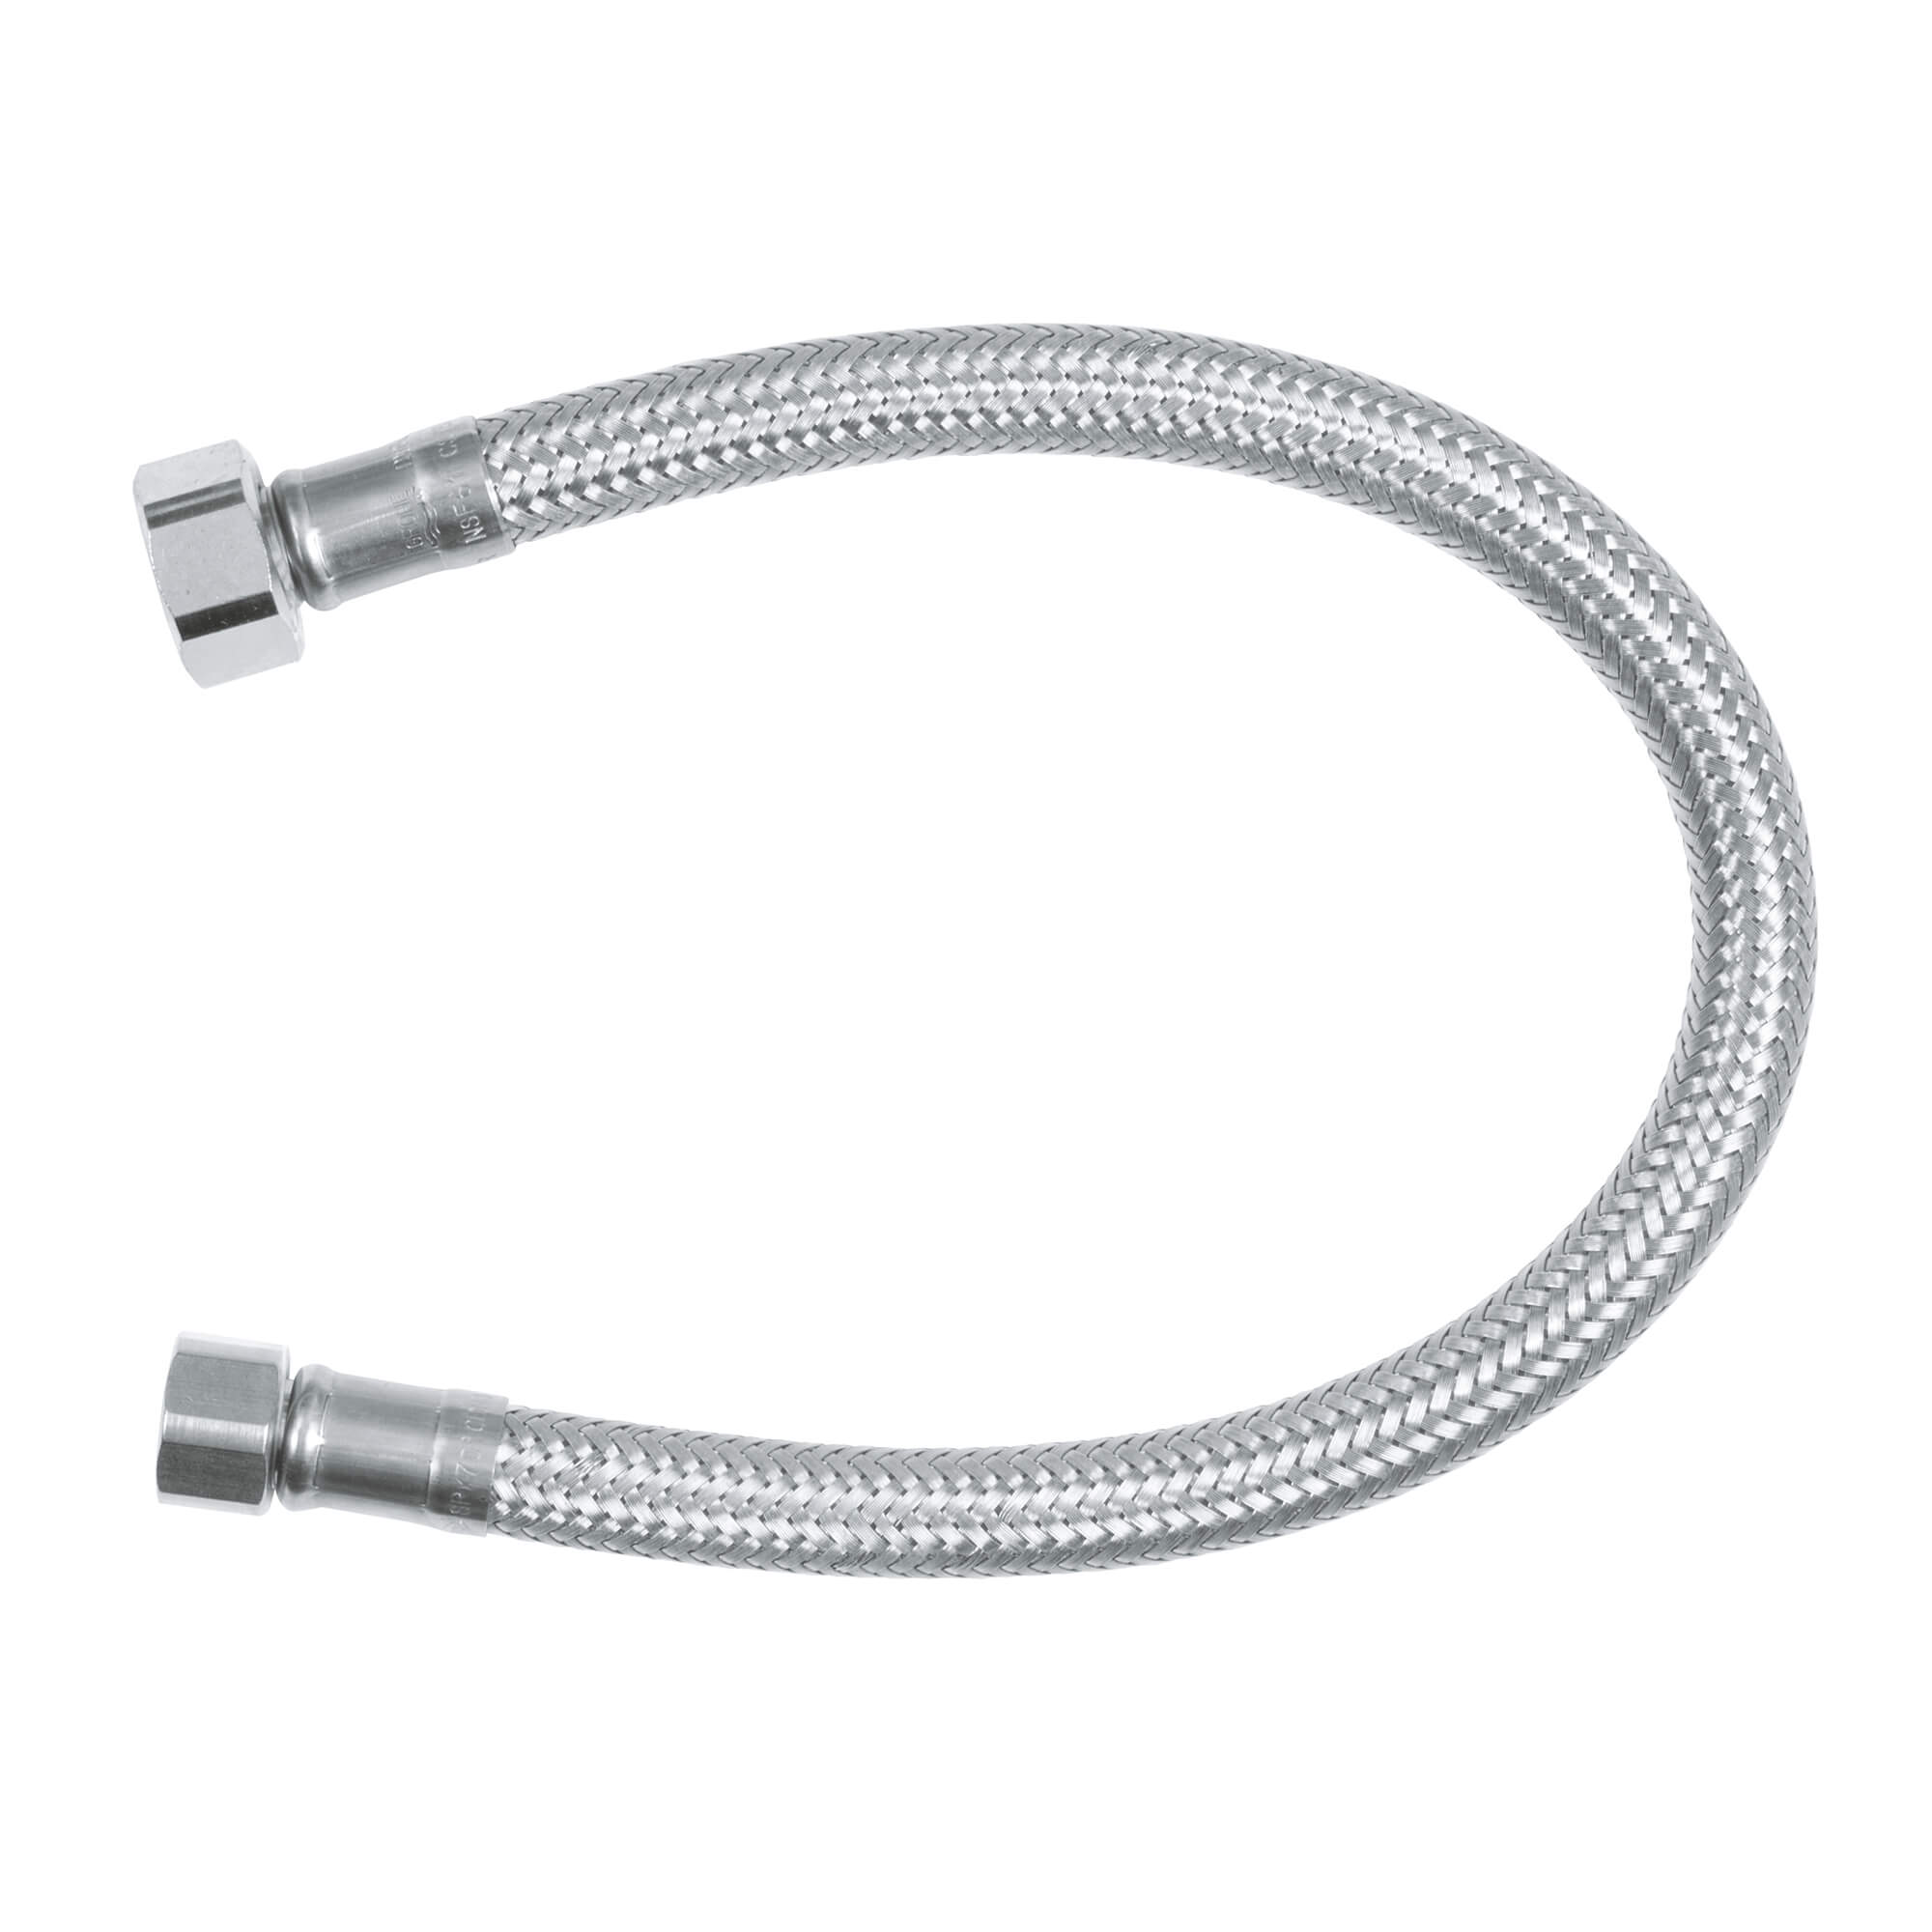 White Flexible Hand Shower Hose 1/2" Connection FOR BOATS 1500mm GROHE 28103 59" 